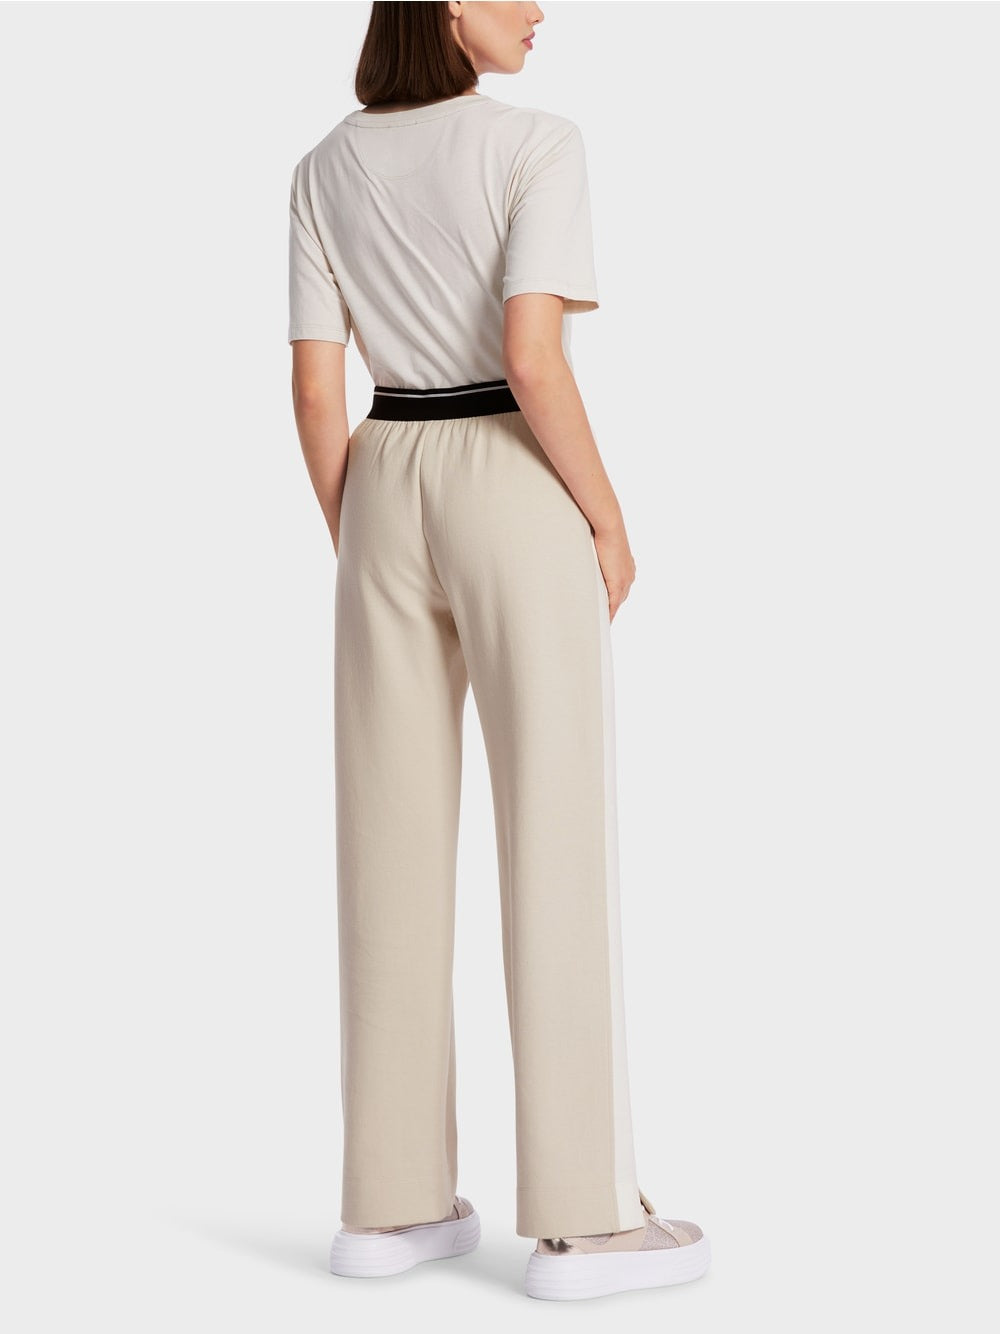 Marc Cain Welby Knit Pant in Moon Rock